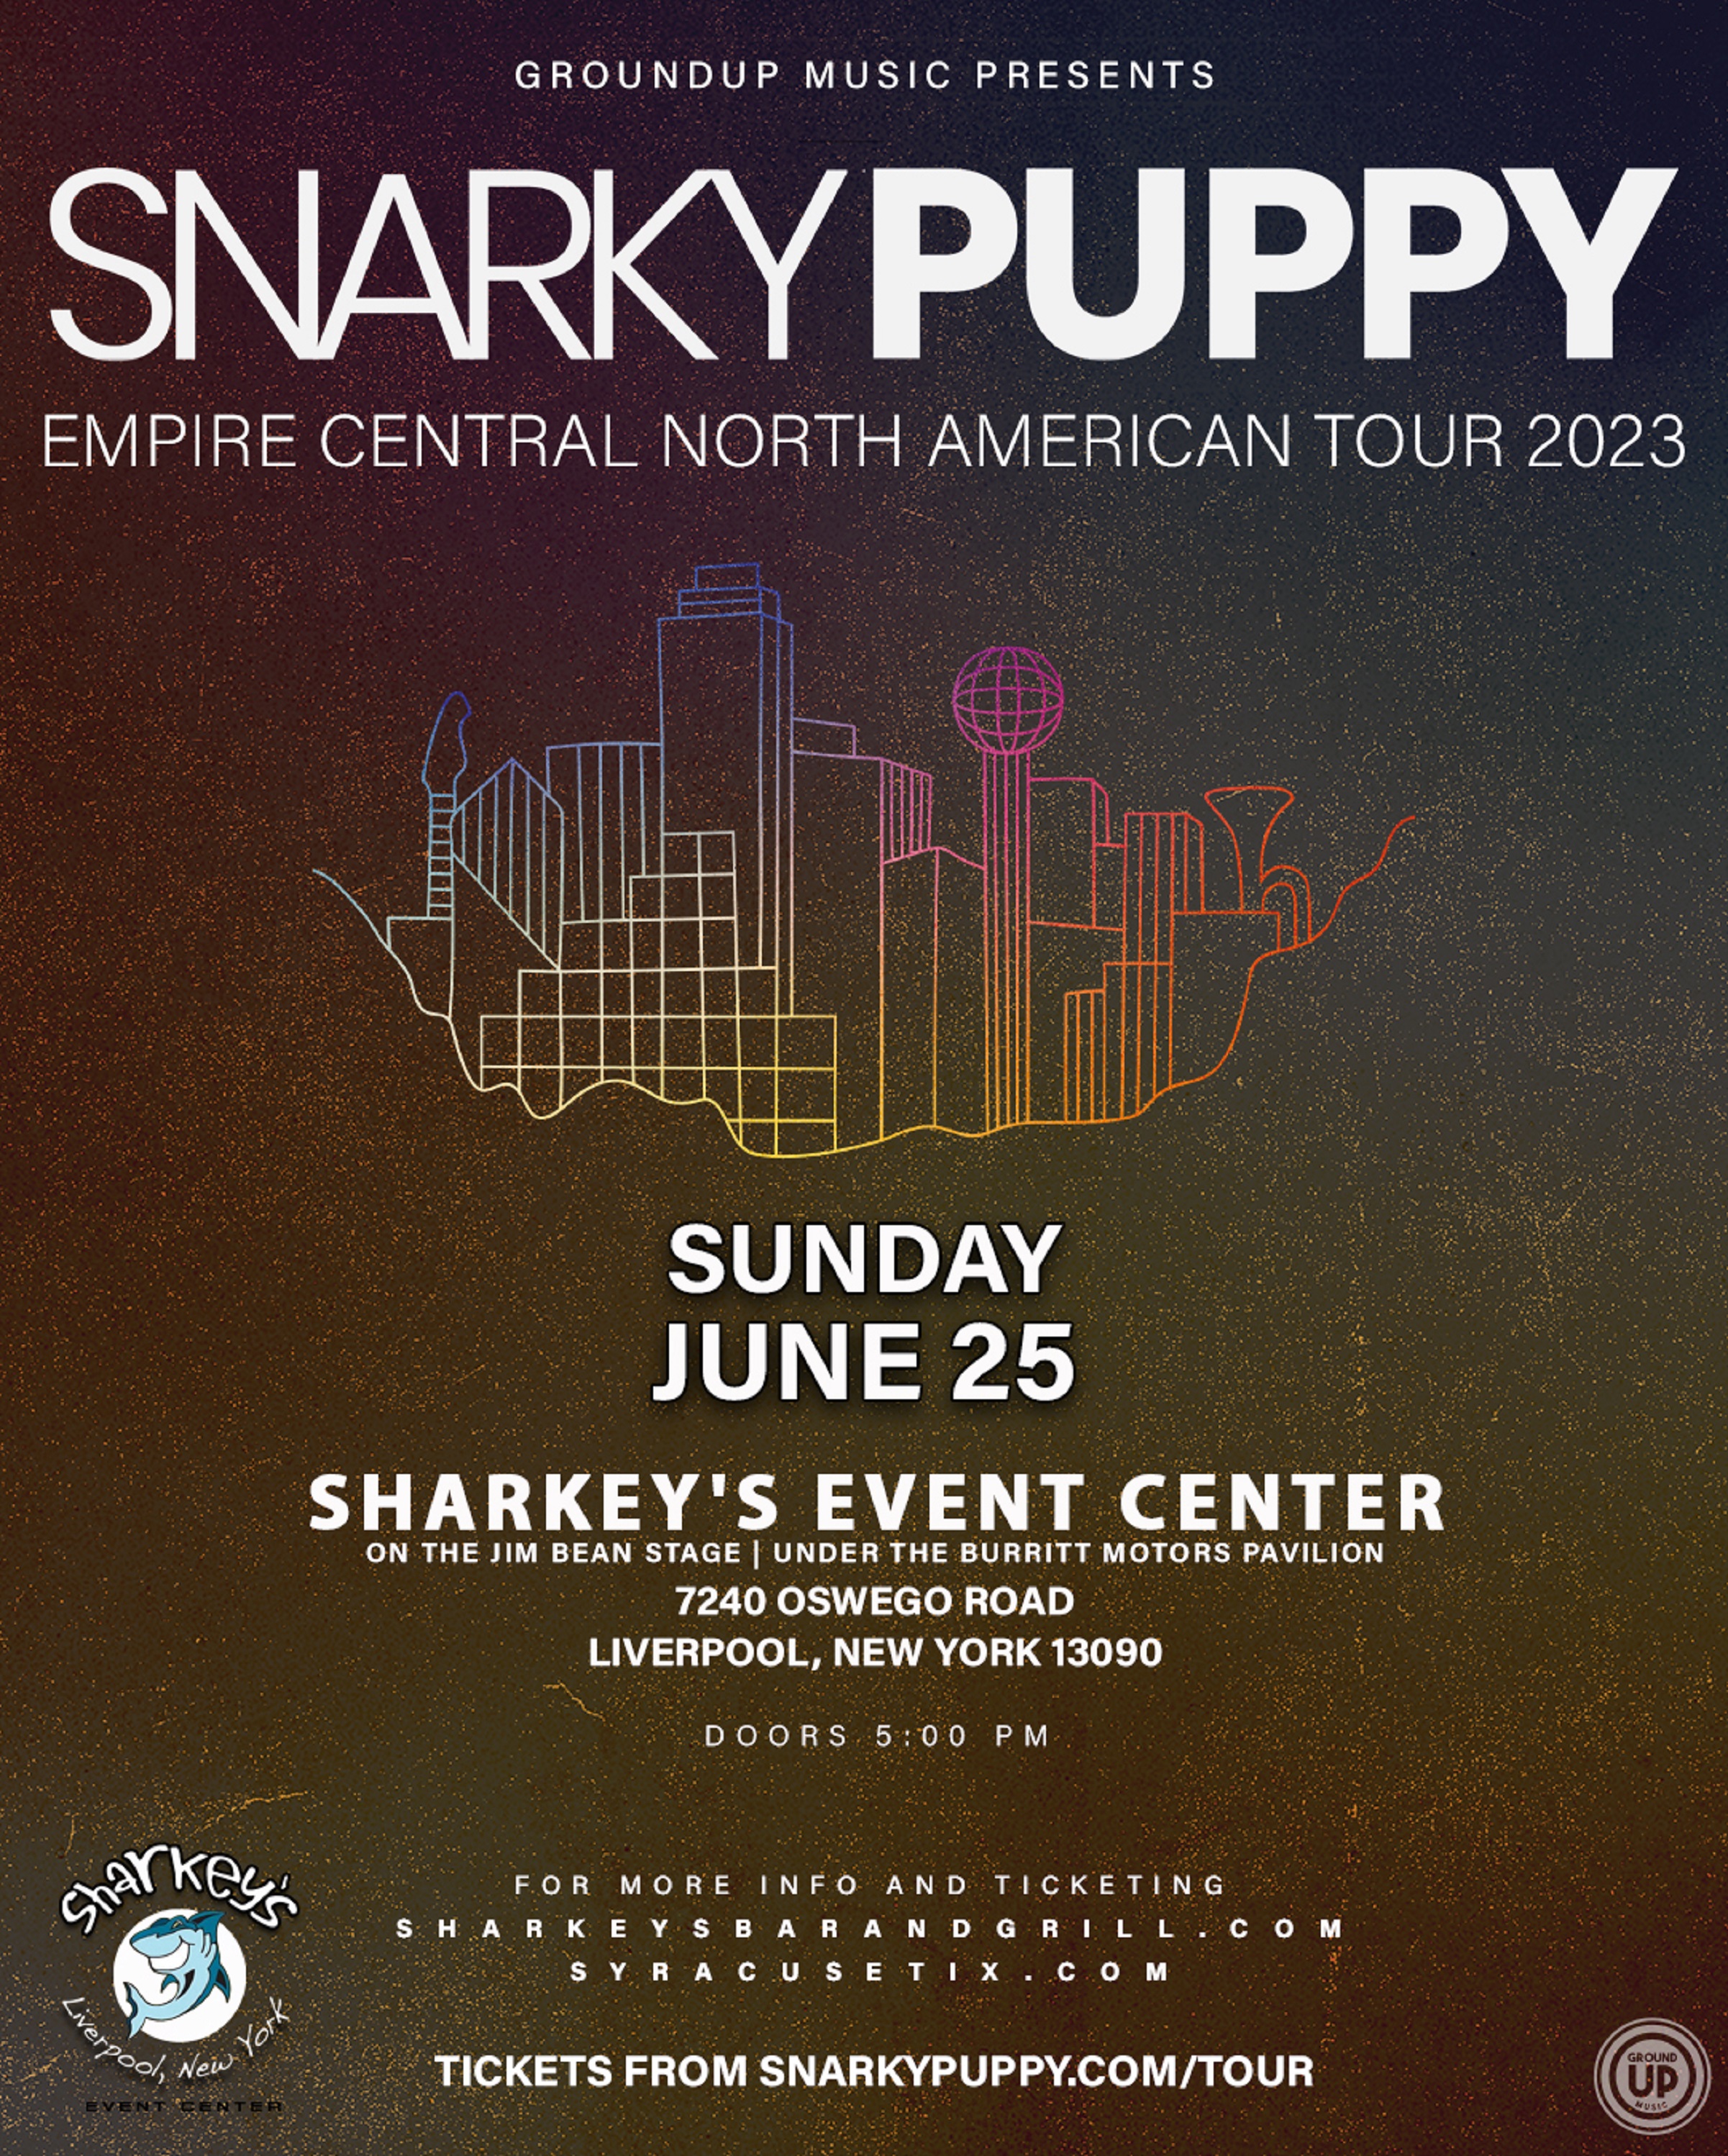 SNARKY PUPPY ADD SYRACUSE SHOW ON SUNDAY JUNE 25TH TO UPCOMING TOUR